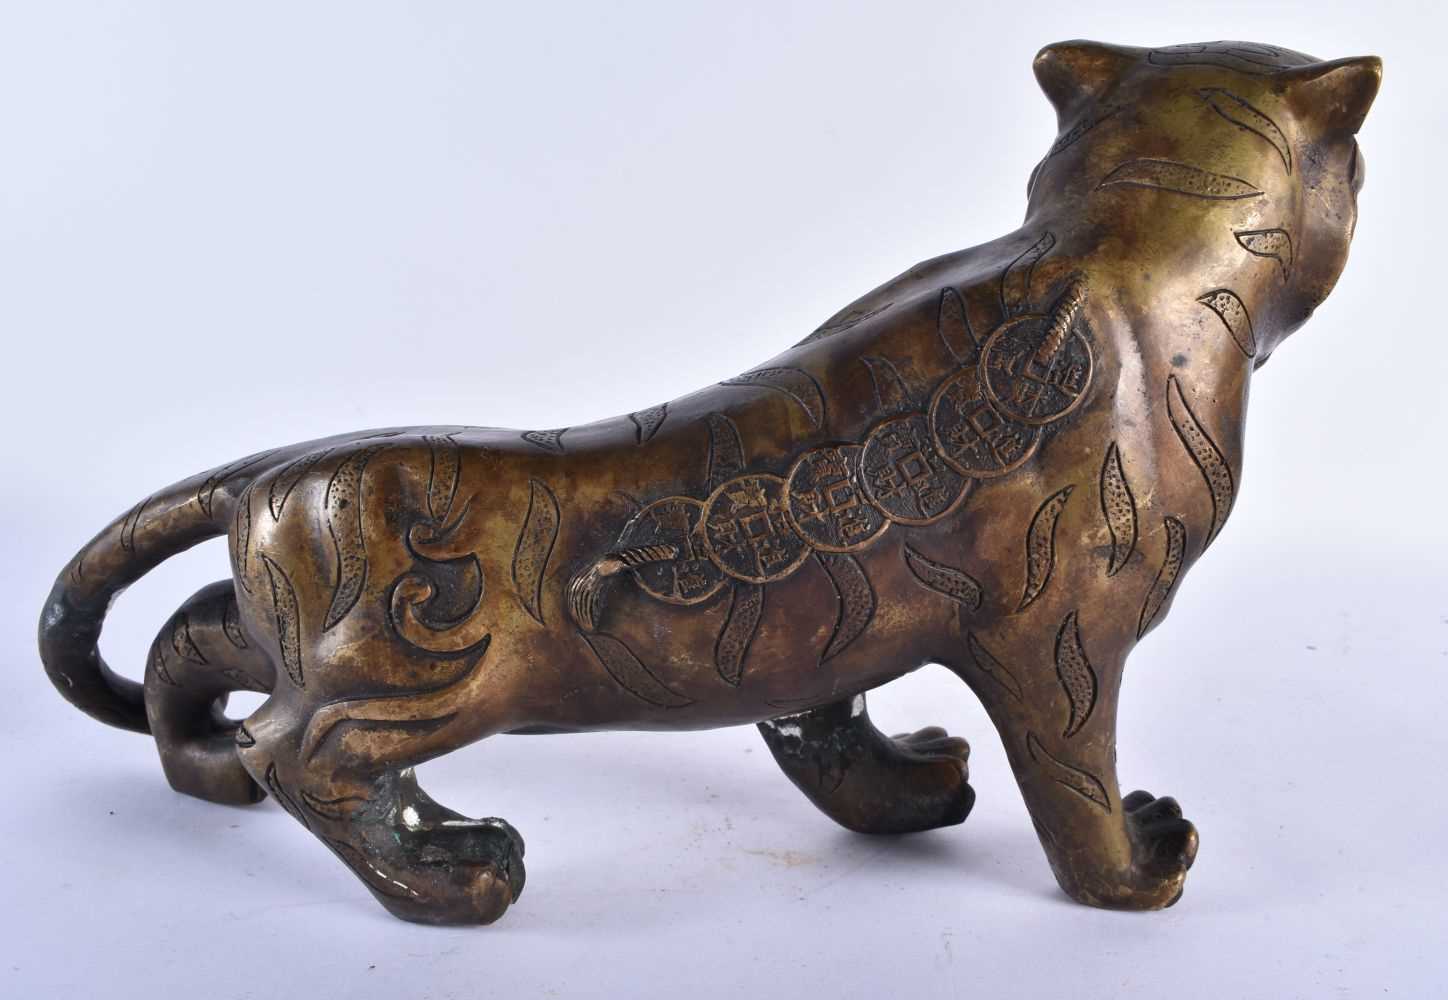 A LARGE CHINESE BRONZE FIGURE OF A LUCKY MONEY TIGER 20th Century. 38 cm x 20 cm. - Image 3 of 5